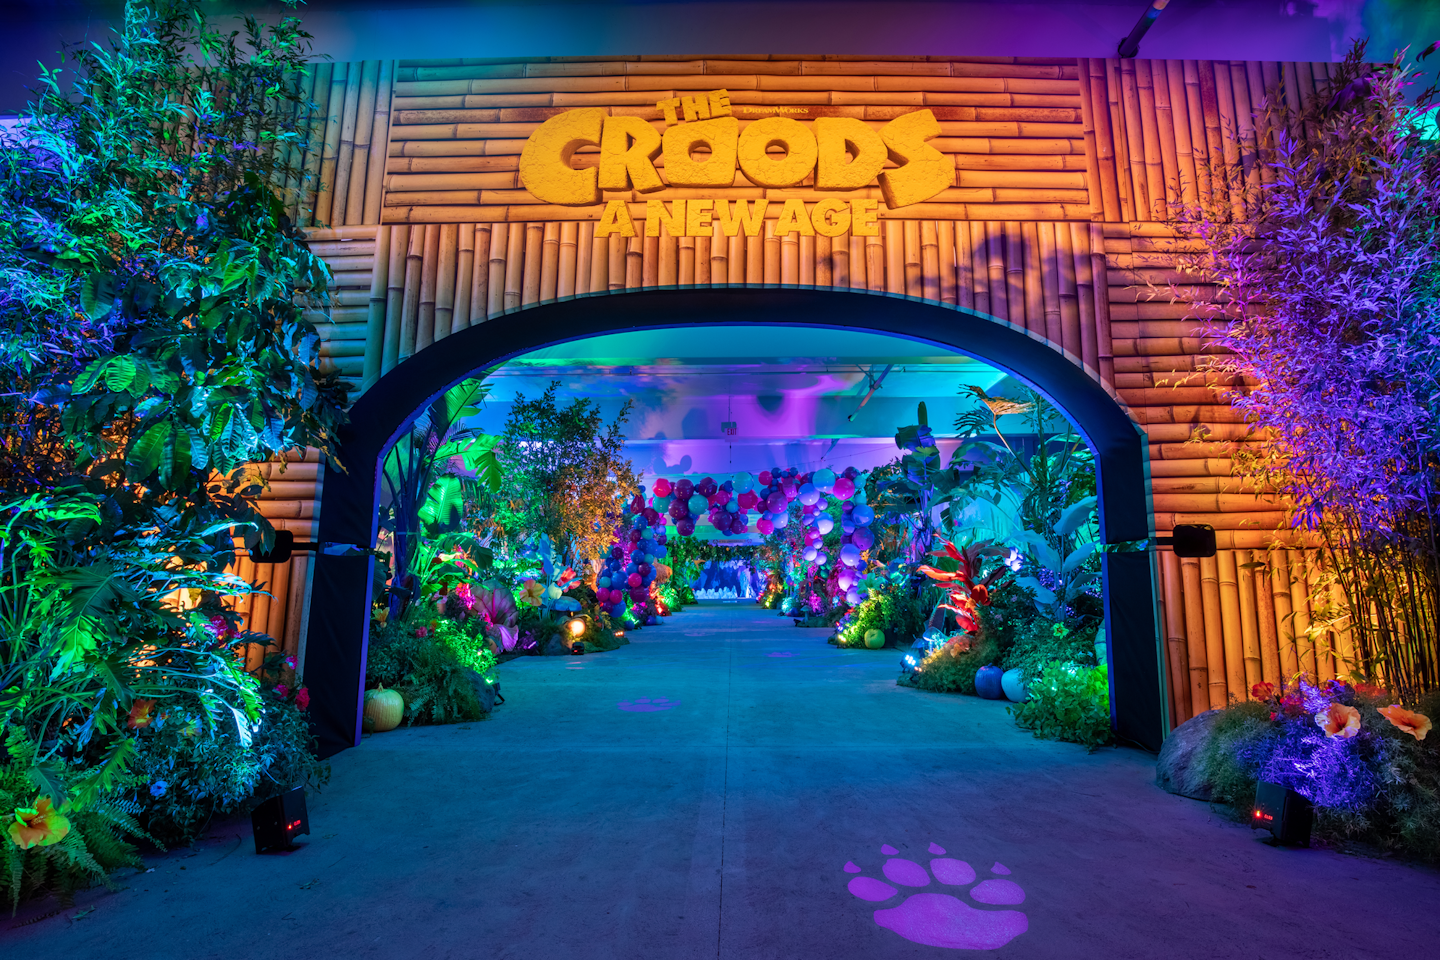 To celebrate its new movie The Croods: A New Age, Universal Pictures and DreamWorks Animation tapped Los Angeles-based production agency 15/40 to create an immersive drive-thru experience and screening that transported guests into the film’s whimsical world.